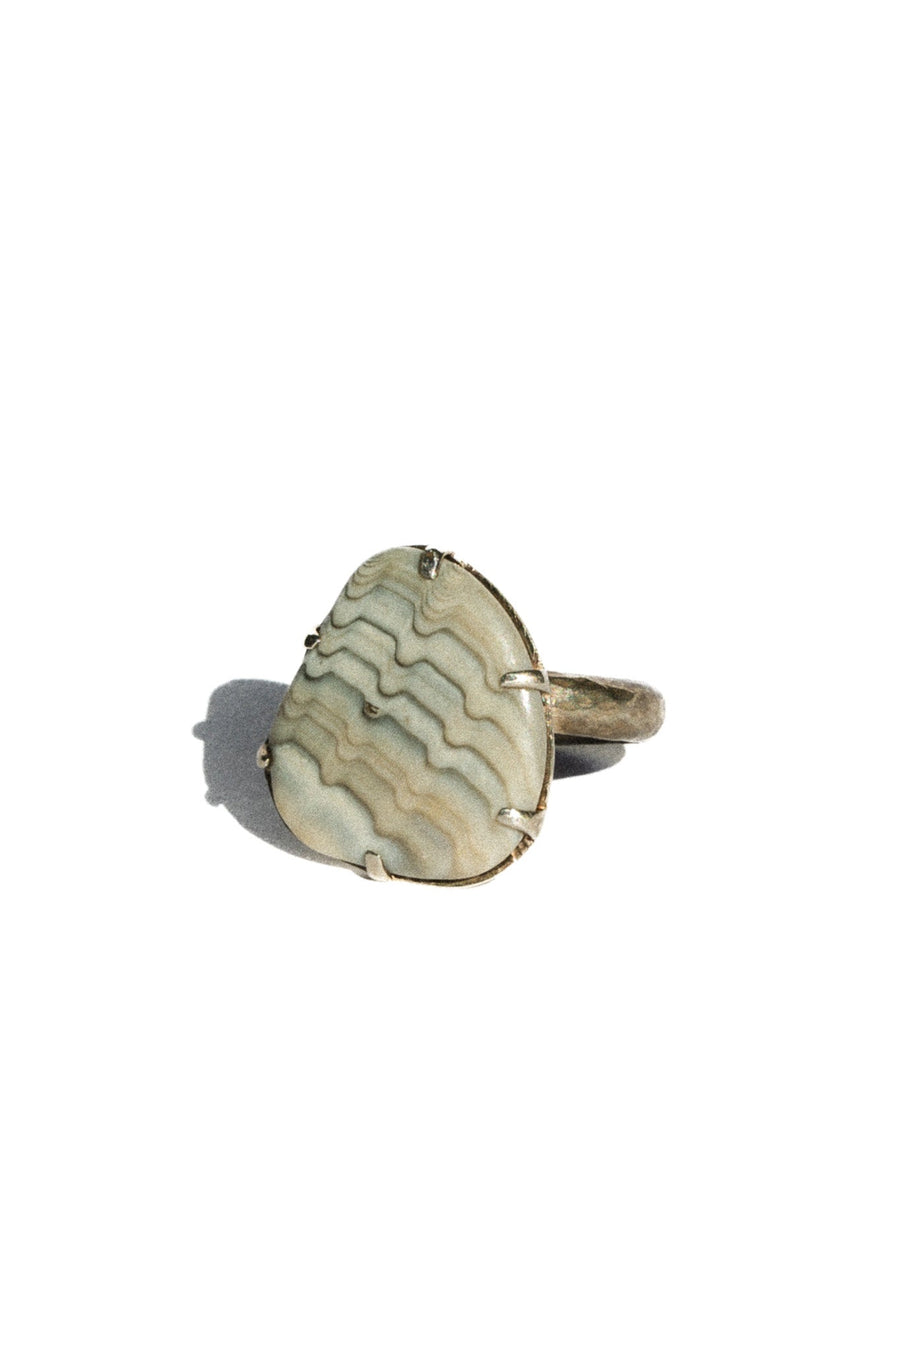 Starborn Creations Jewelry Old Soul Fossilized Oyster Shell Ring